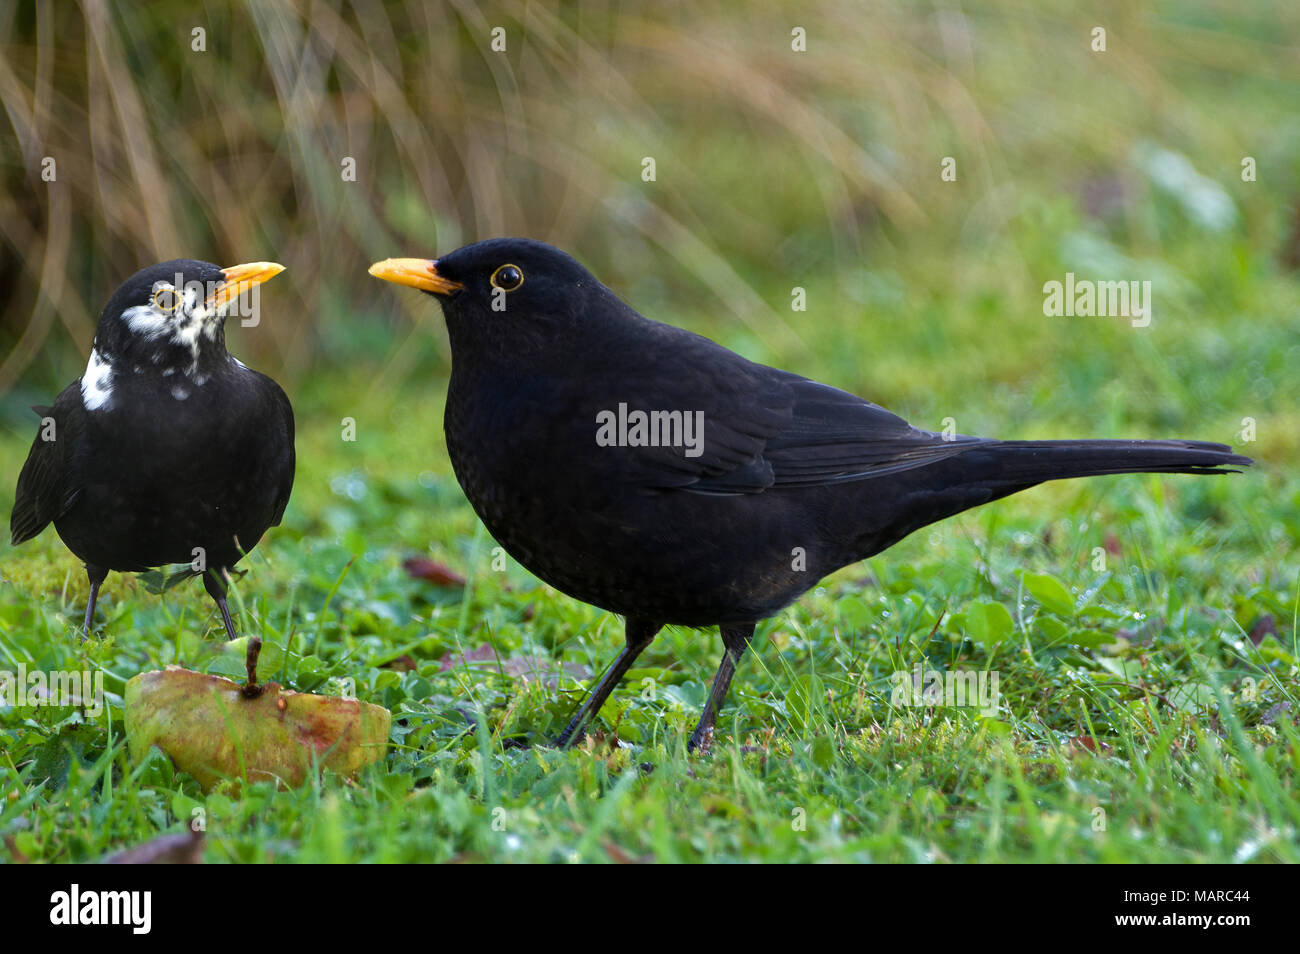 Blackbird (Turdus merula) Two males: One pure black, the other with white feathers in a garden. Germany Stock Photo